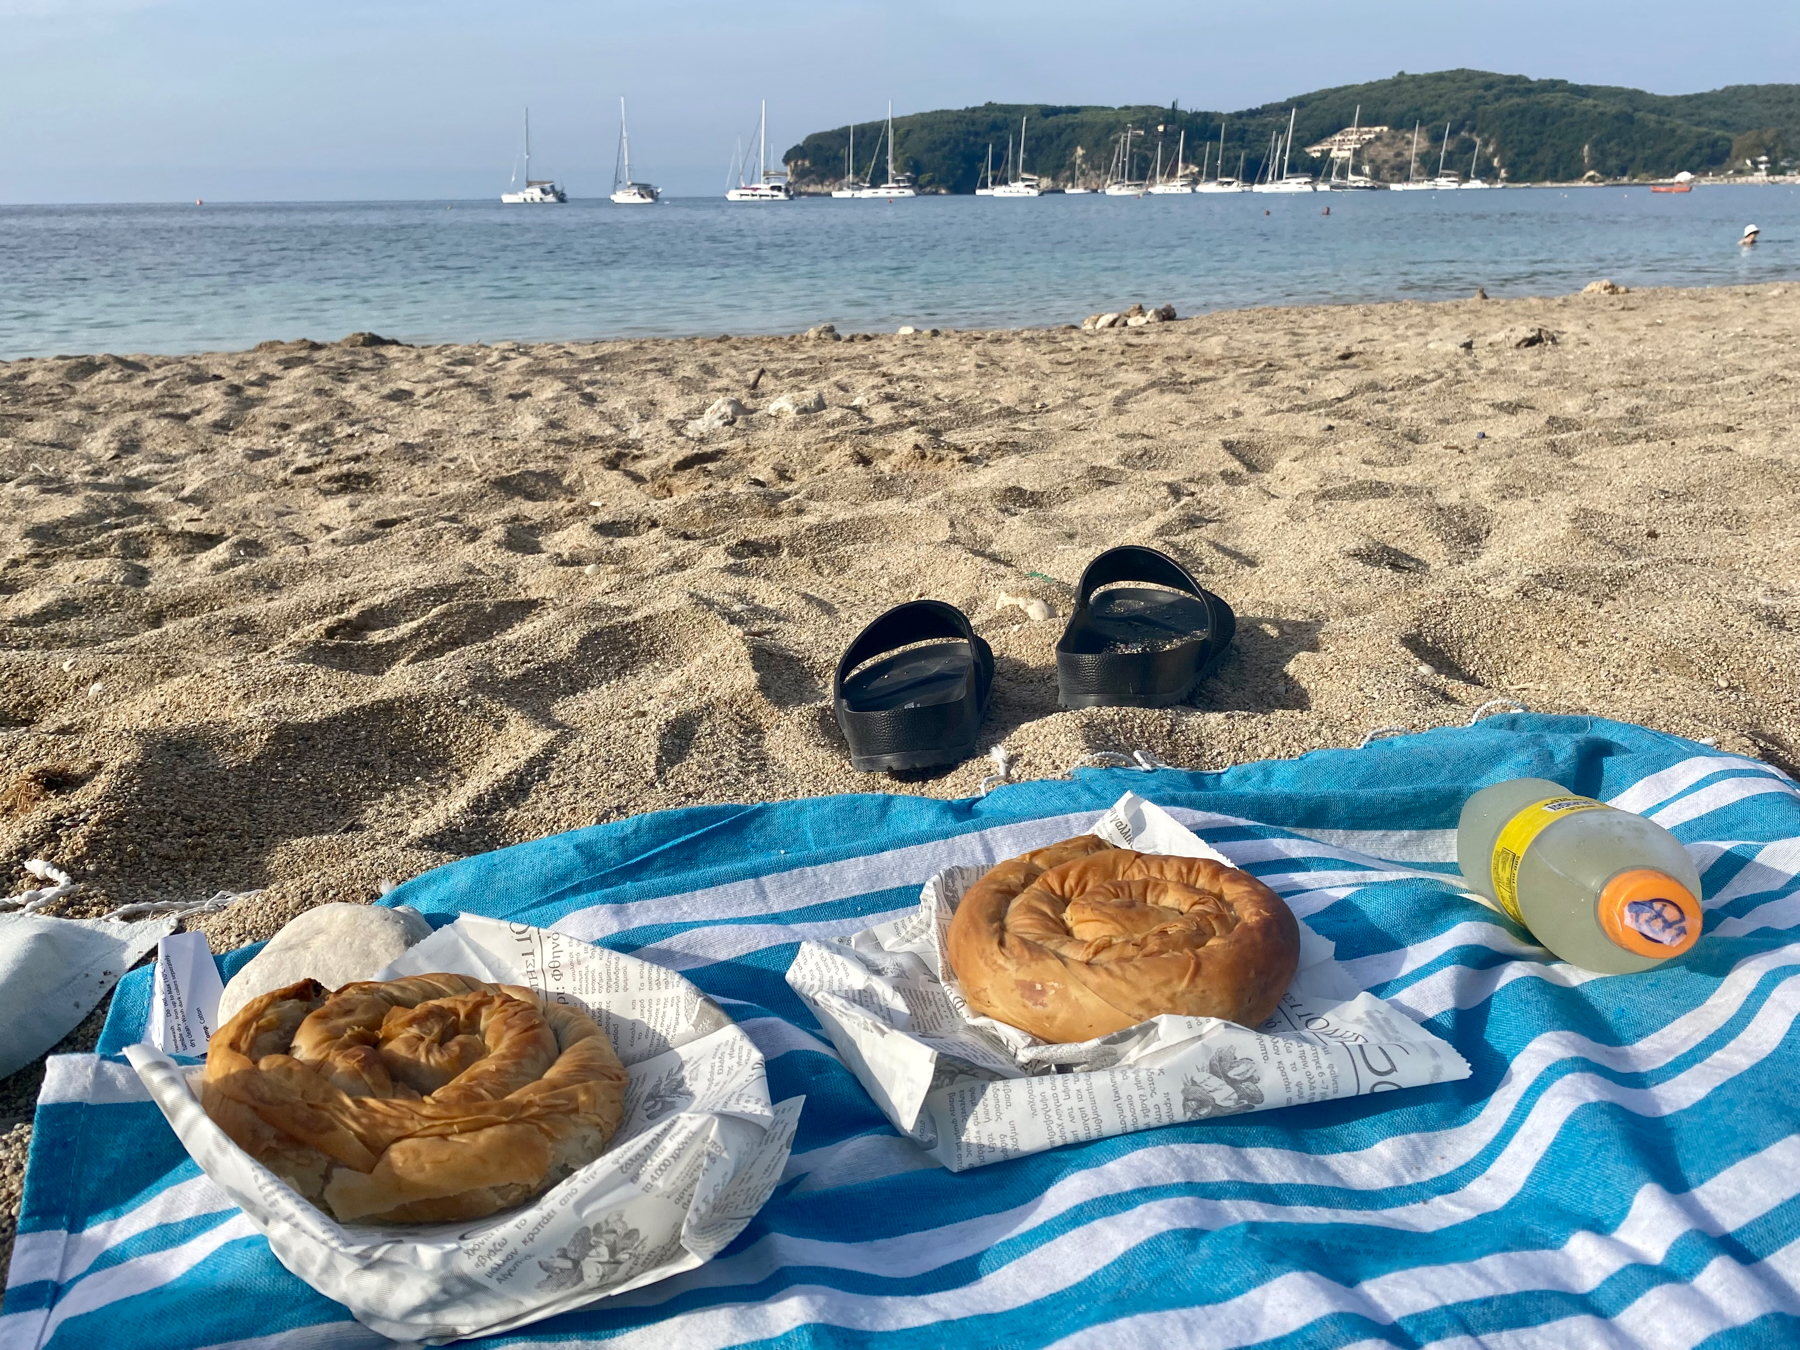 Two filo pastry pies, bottle of Fanta on a towel on a sandy beach